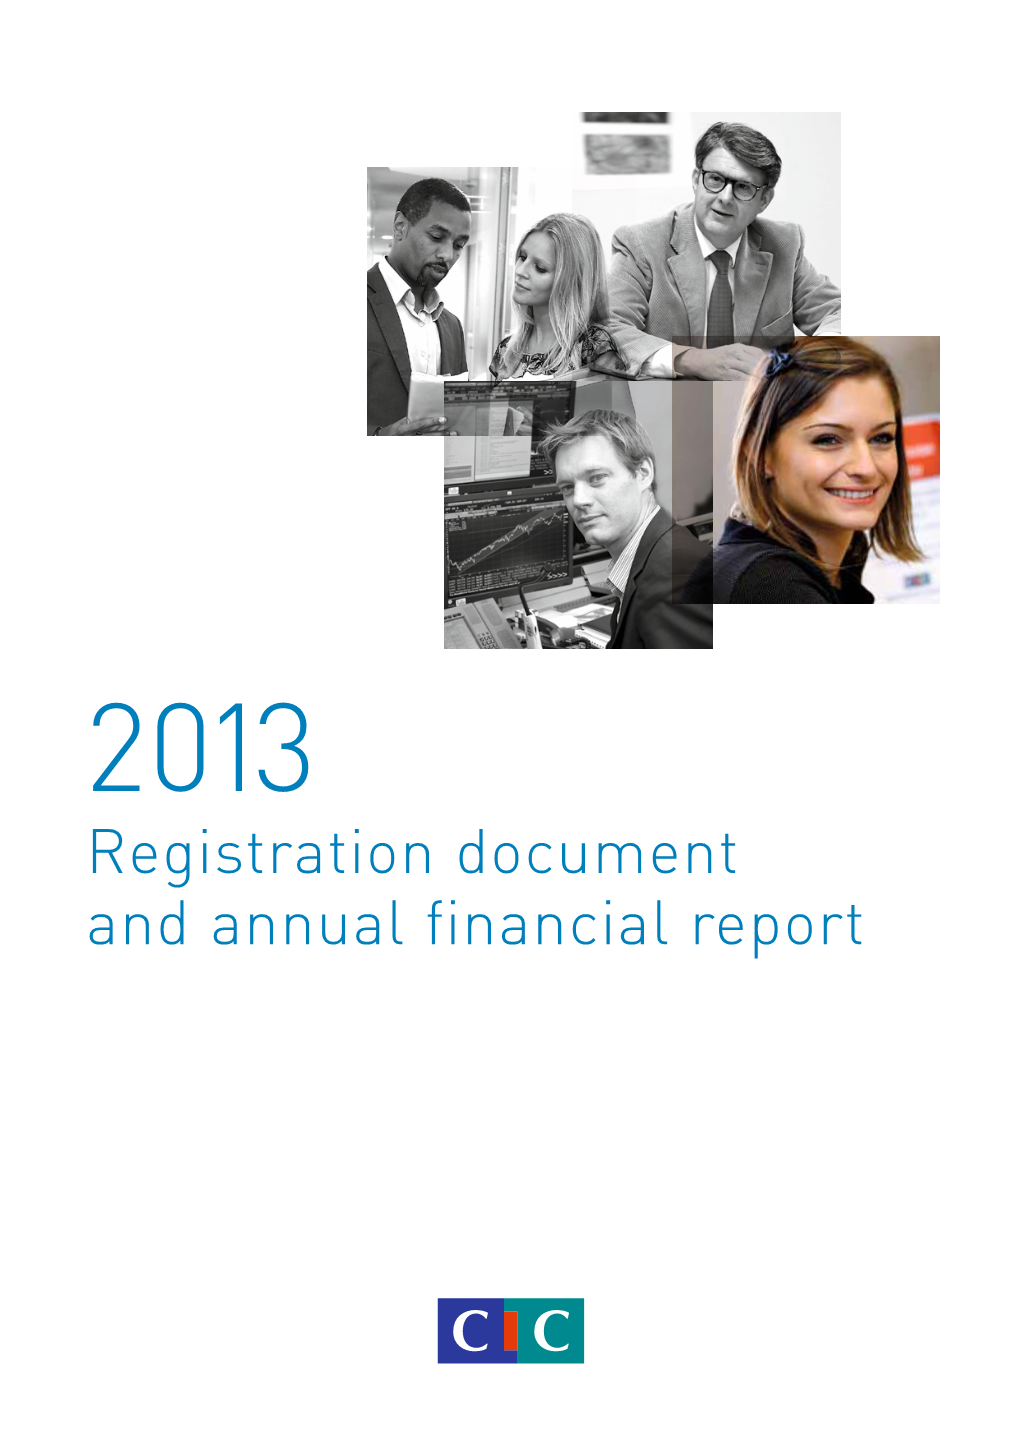 Registration Document and Annual Financial Report